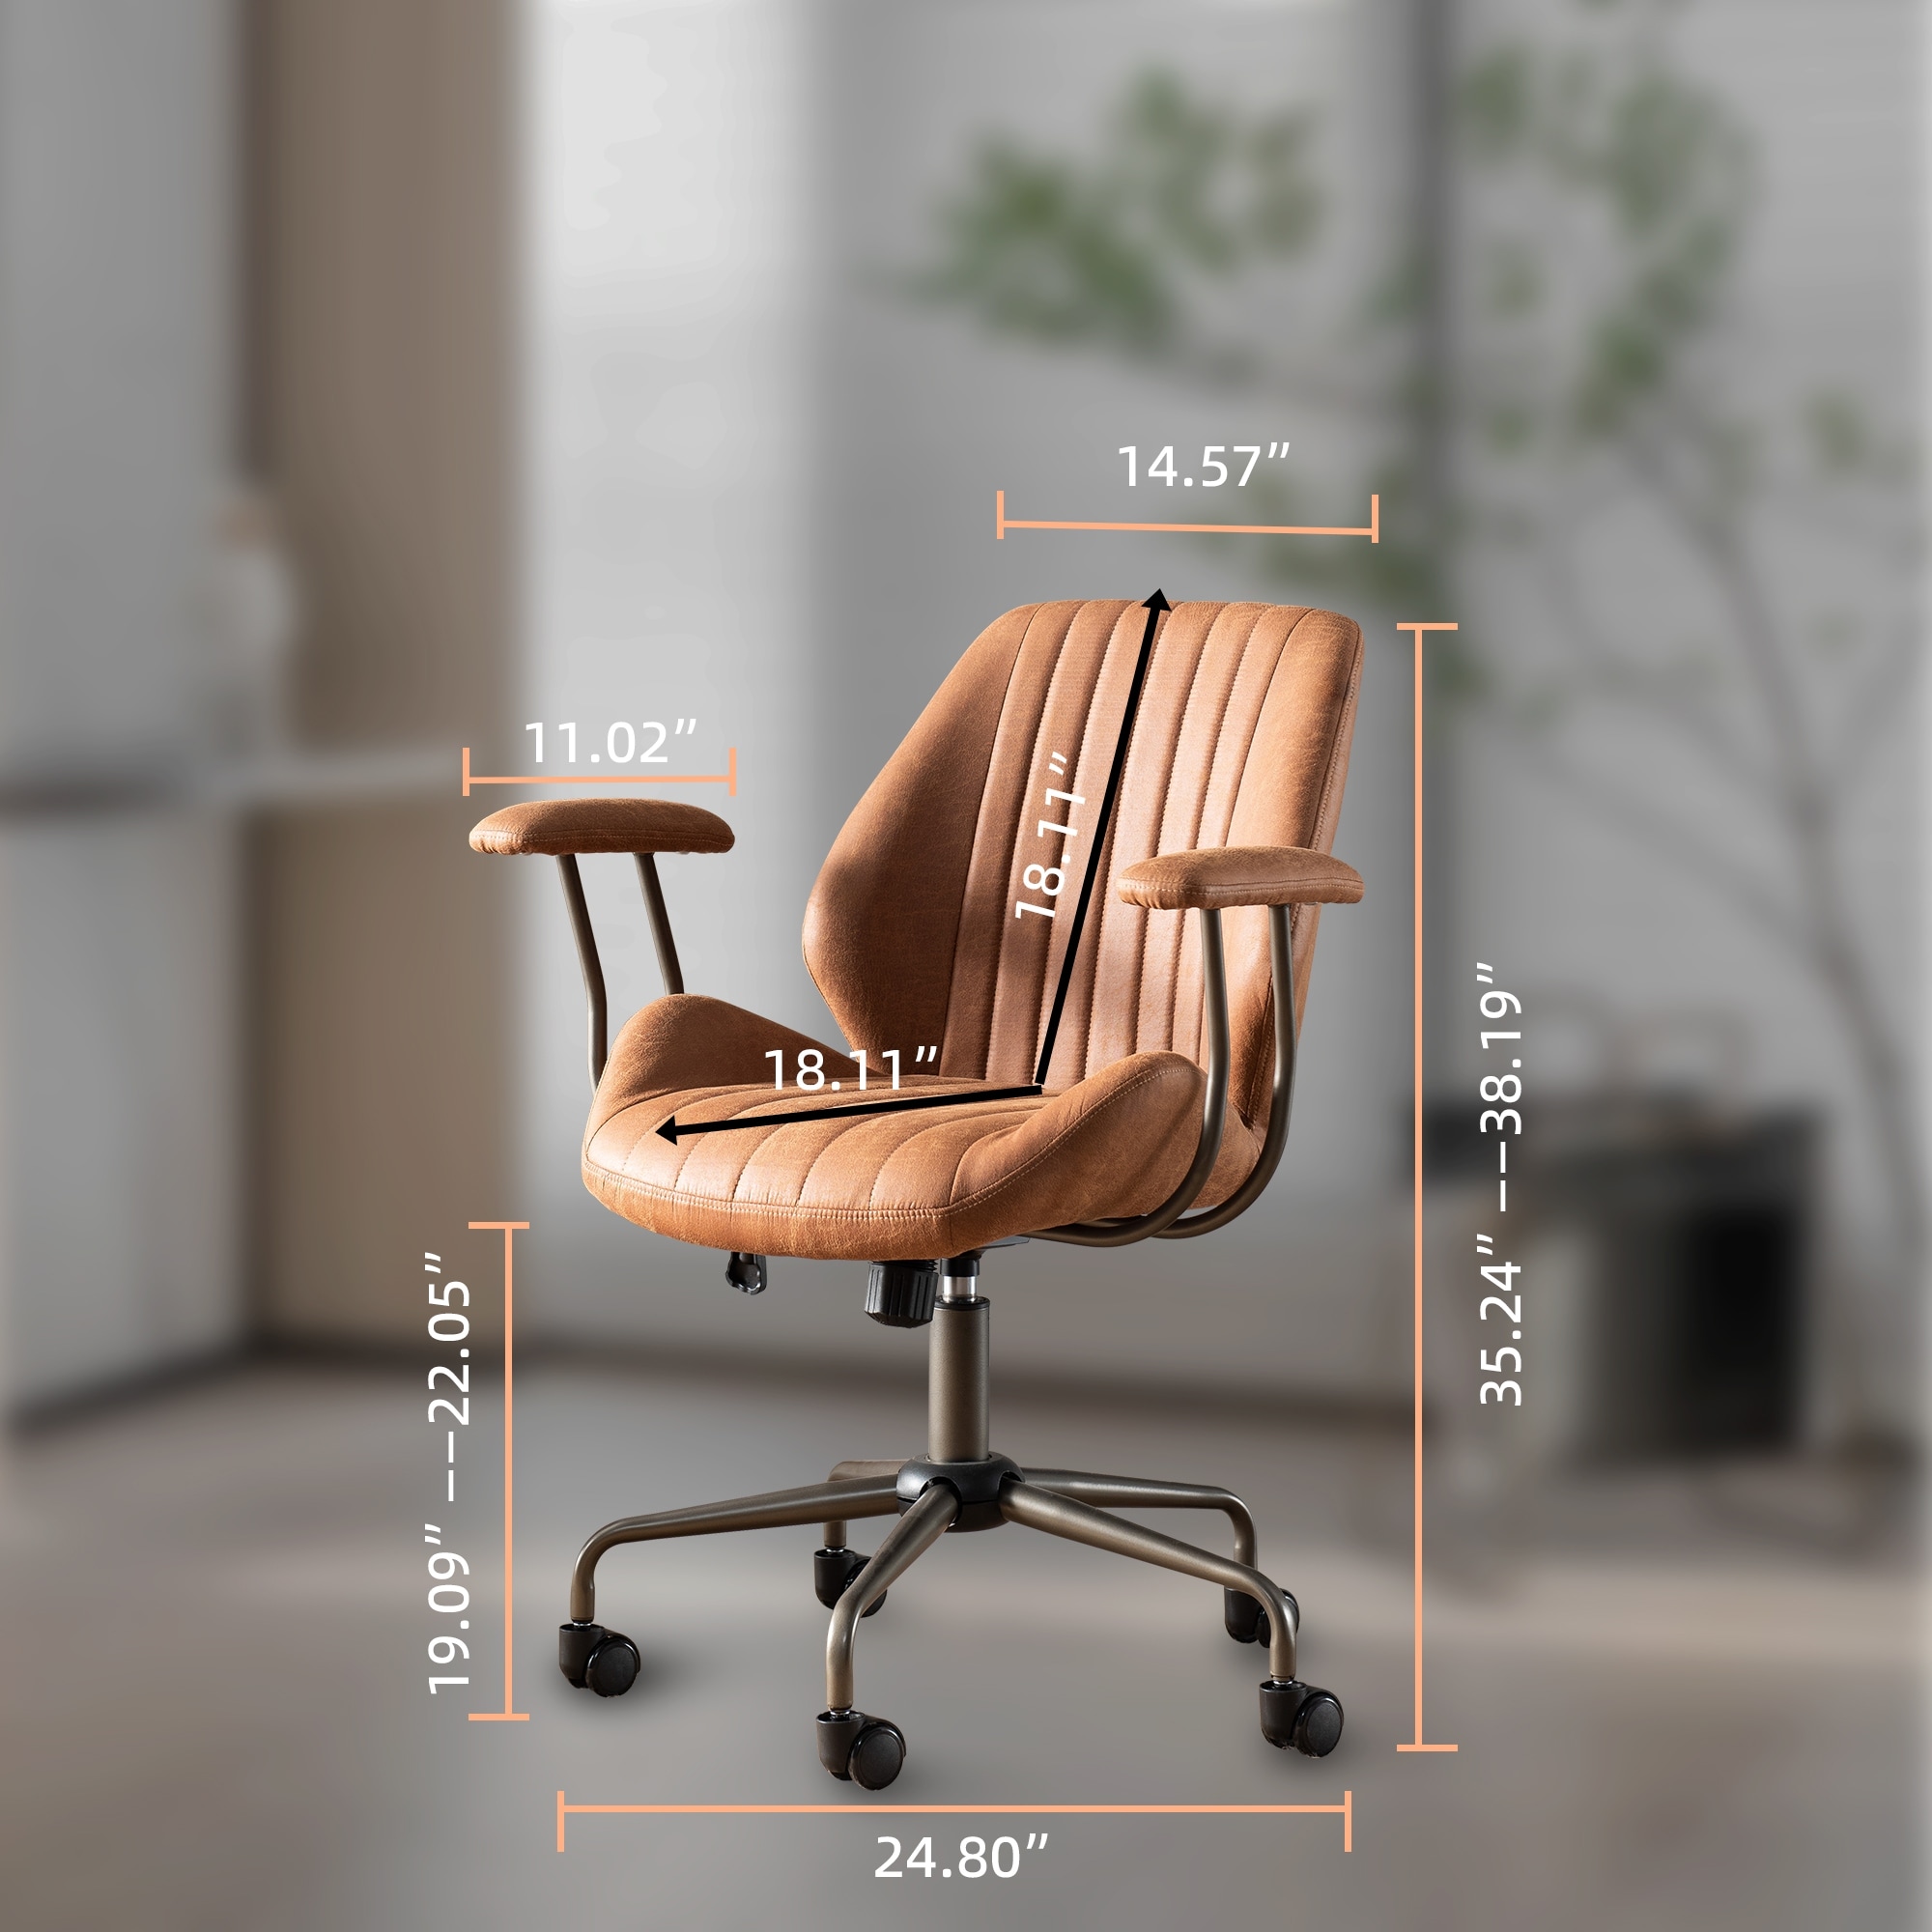 https://ak1.ostkcdn.com/images/products/is/images/direct/7f848413cac915182f9e4fa5df367391ee8e0dd0/Ovios-Ergonomic-Classic-Suede-Office-Chair-Desk-Chair.jpg